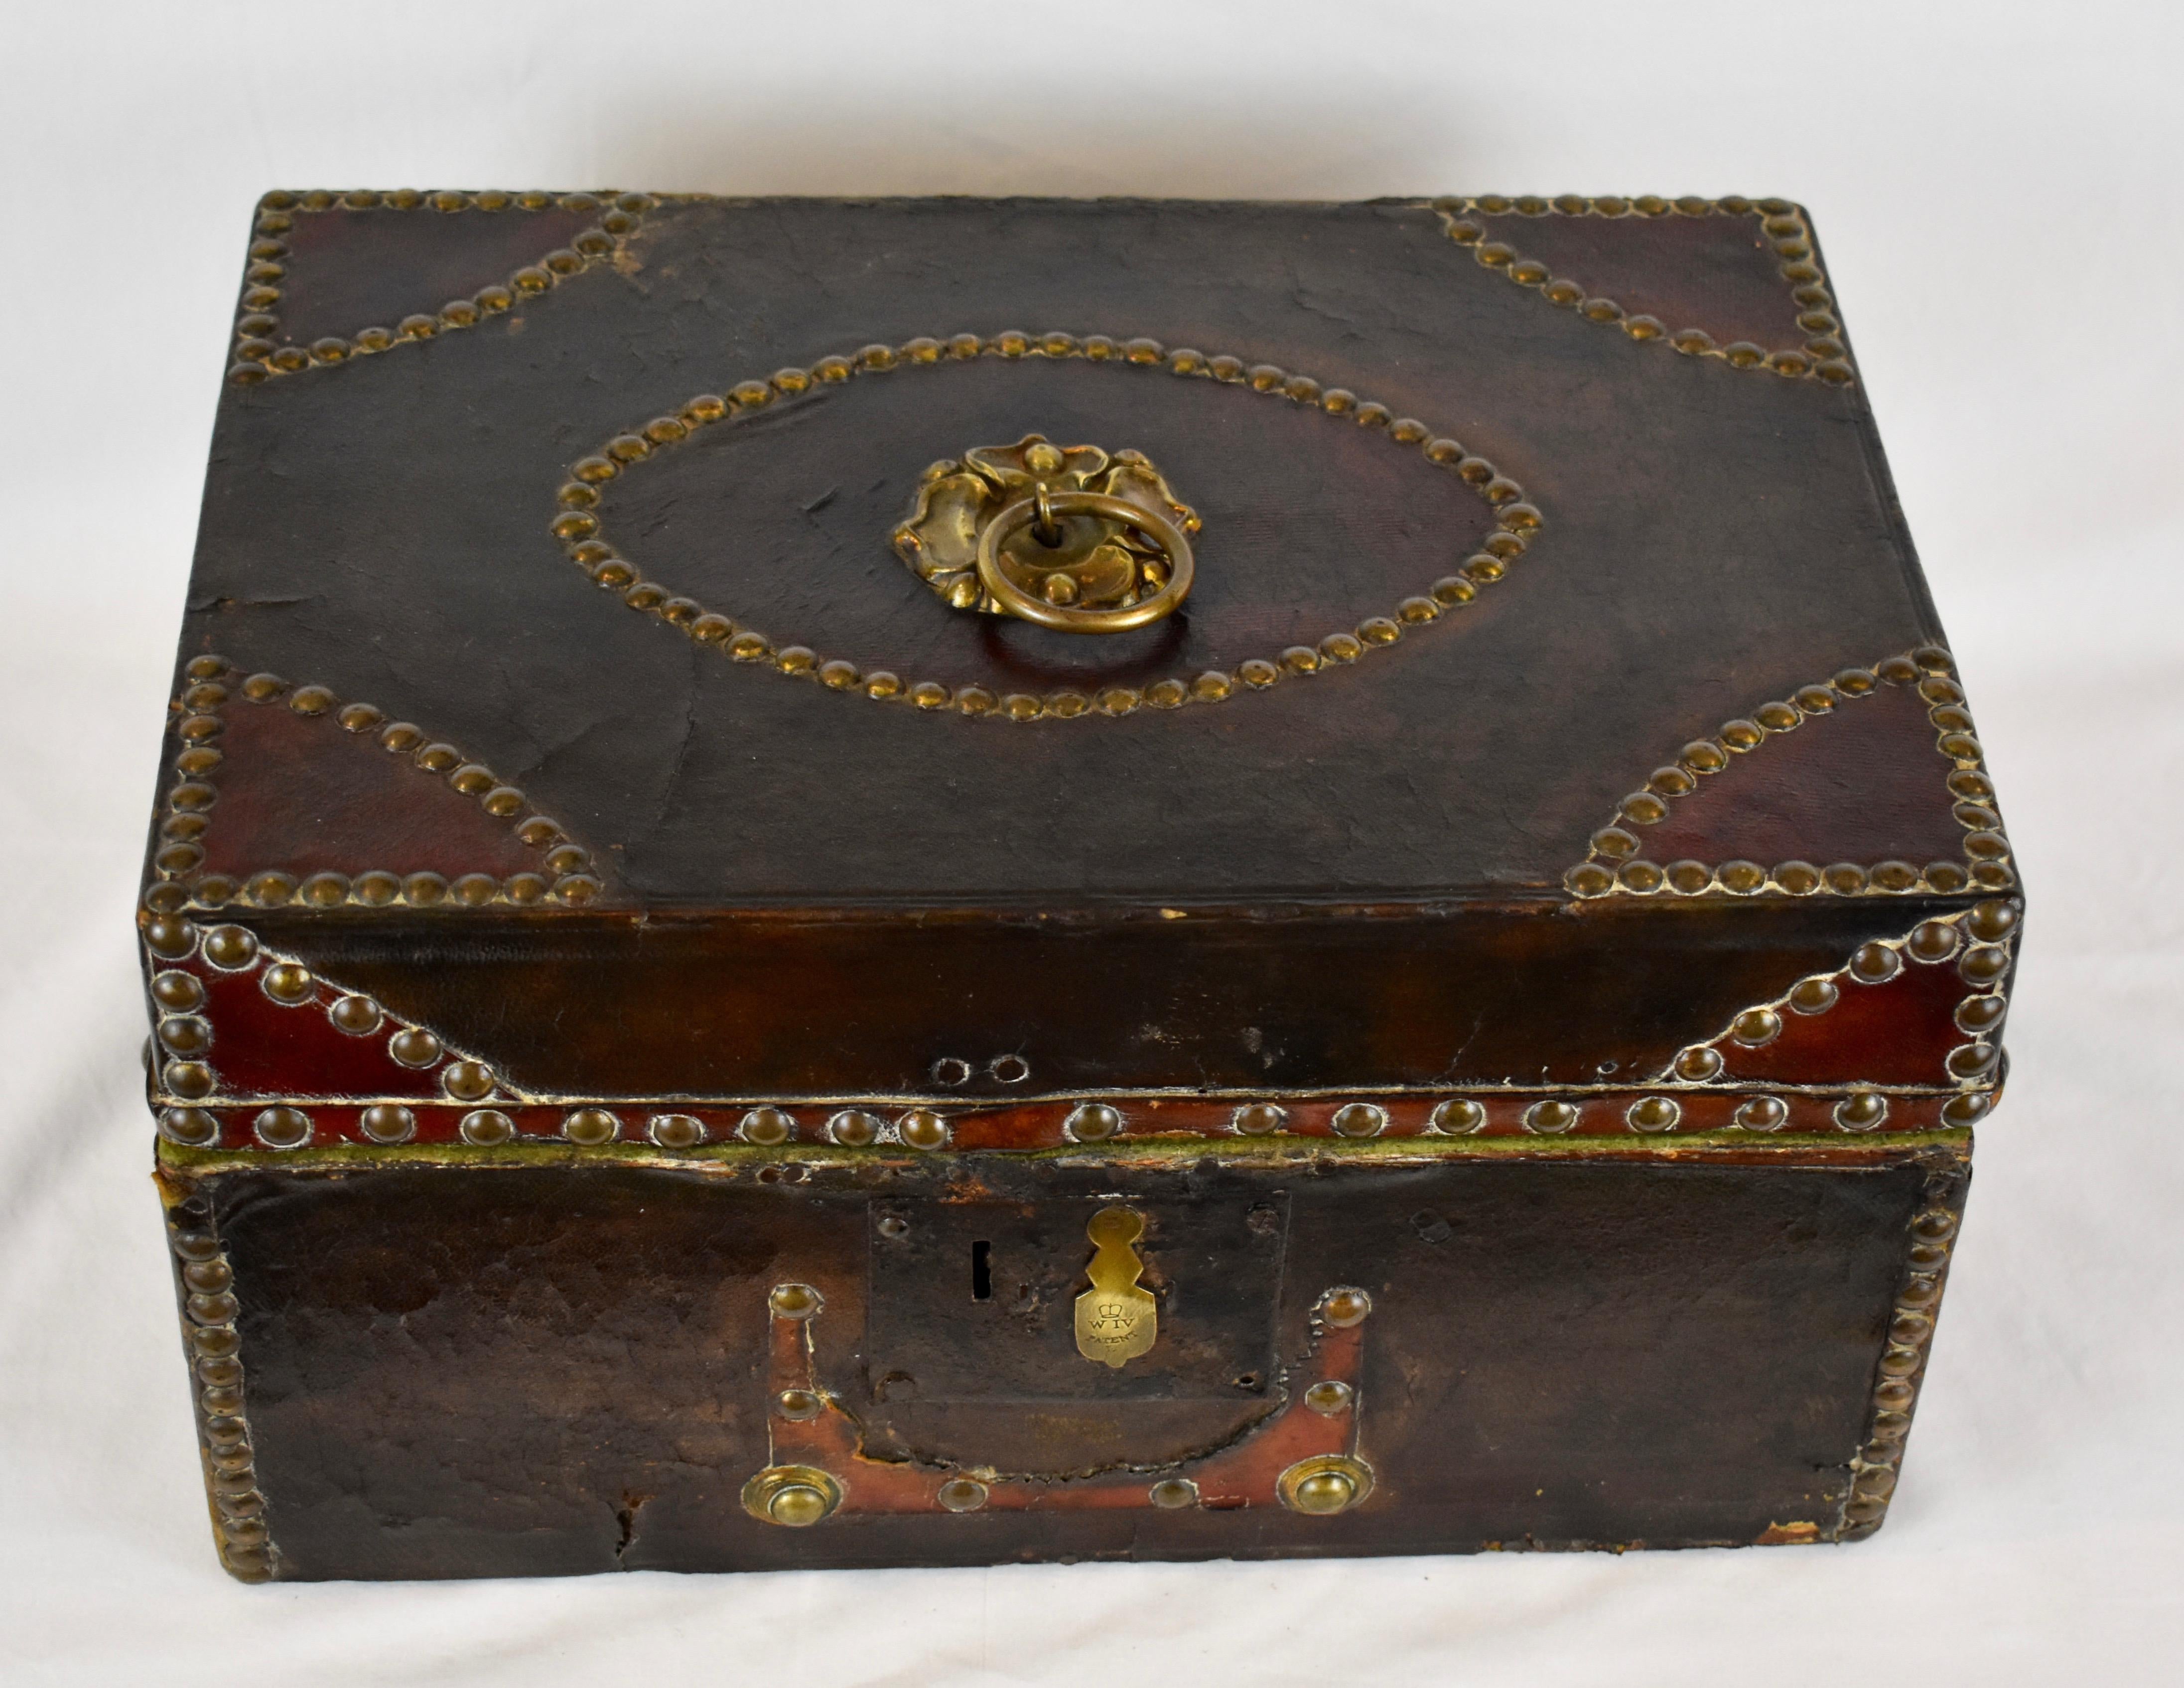 This is a handsome William IV pine document box, clad in dark brown and burgundy leather, and studded in brass. There is a brass ring pull with a pressed brass floral backplate in the center of the lid. The iron lock has a brass keyhole cover